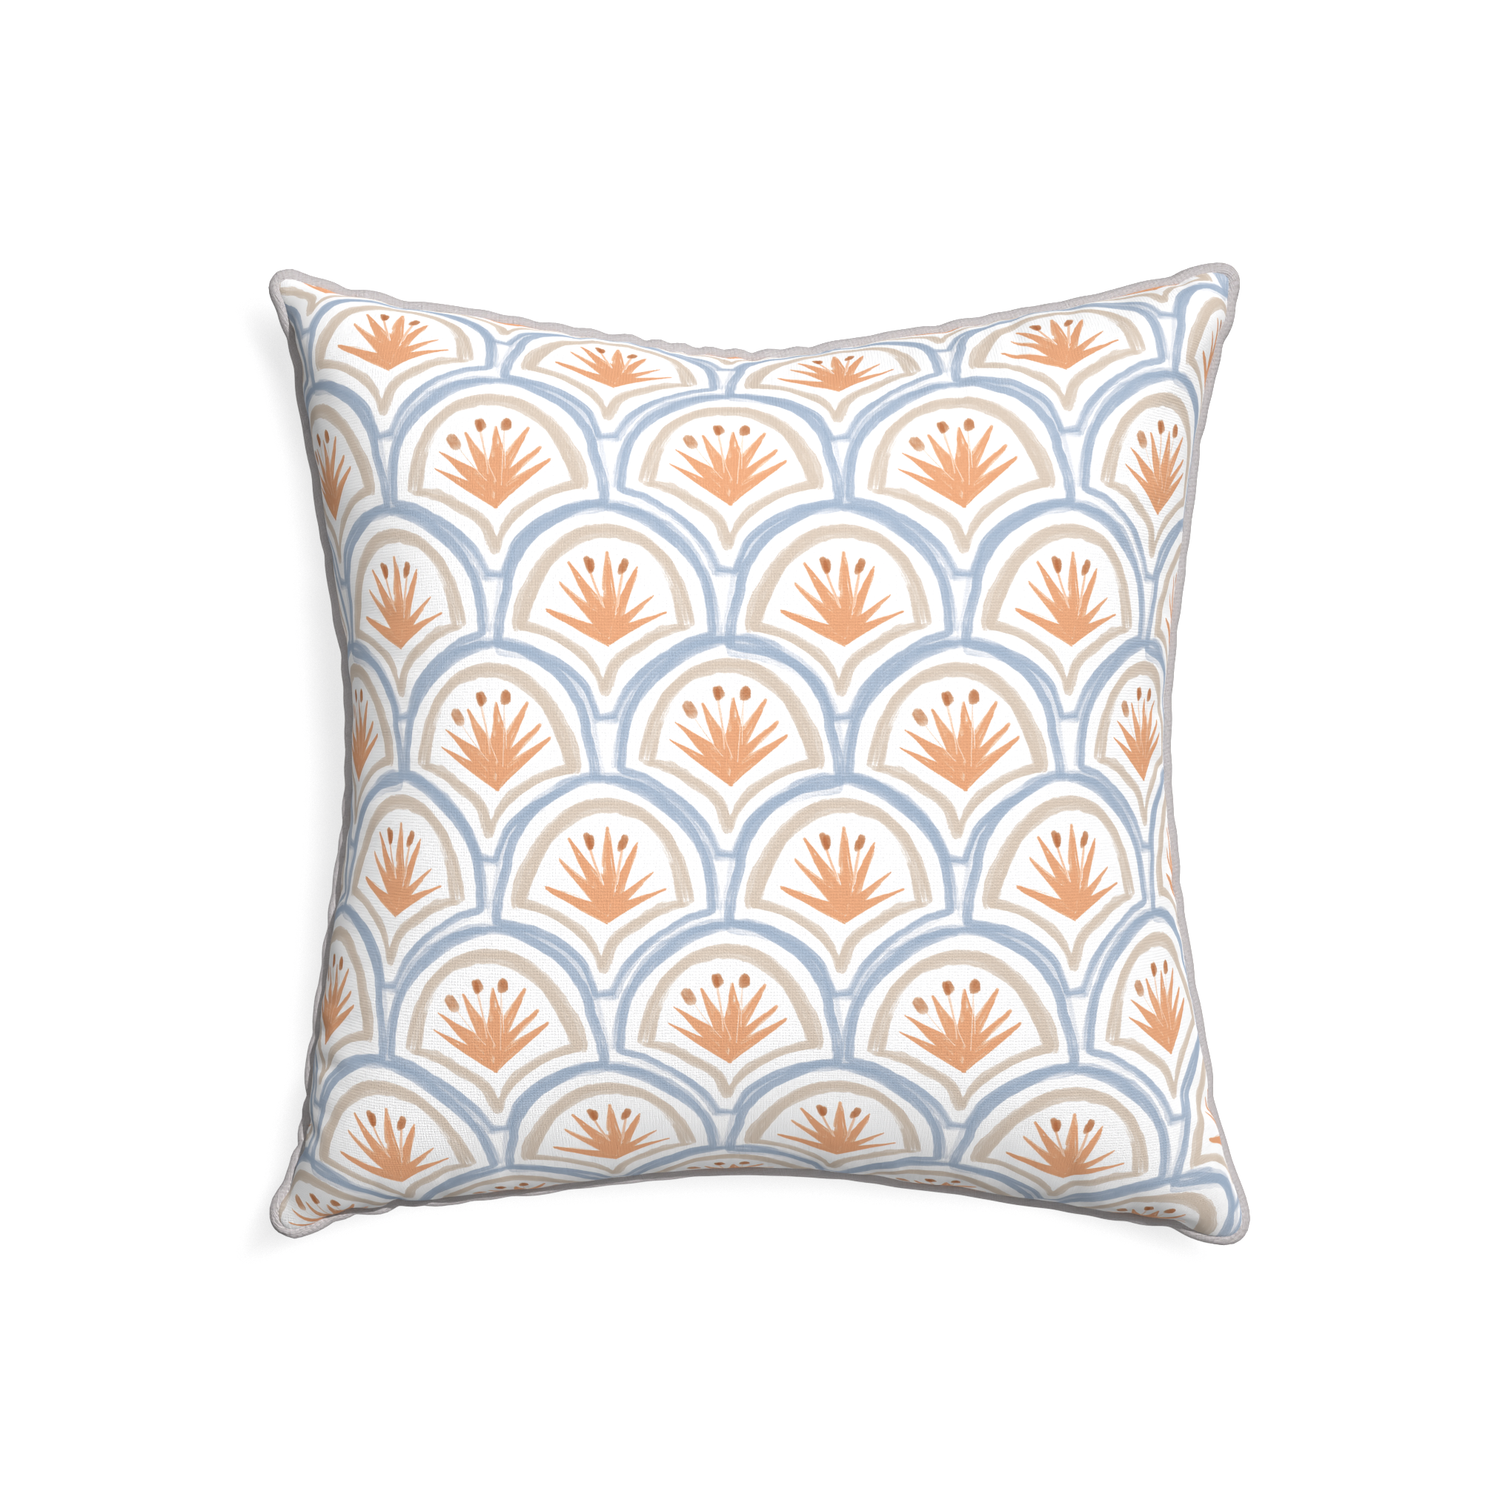 22-square thatcher apricot custom art deco palm patternpillow with pebble piping on white background